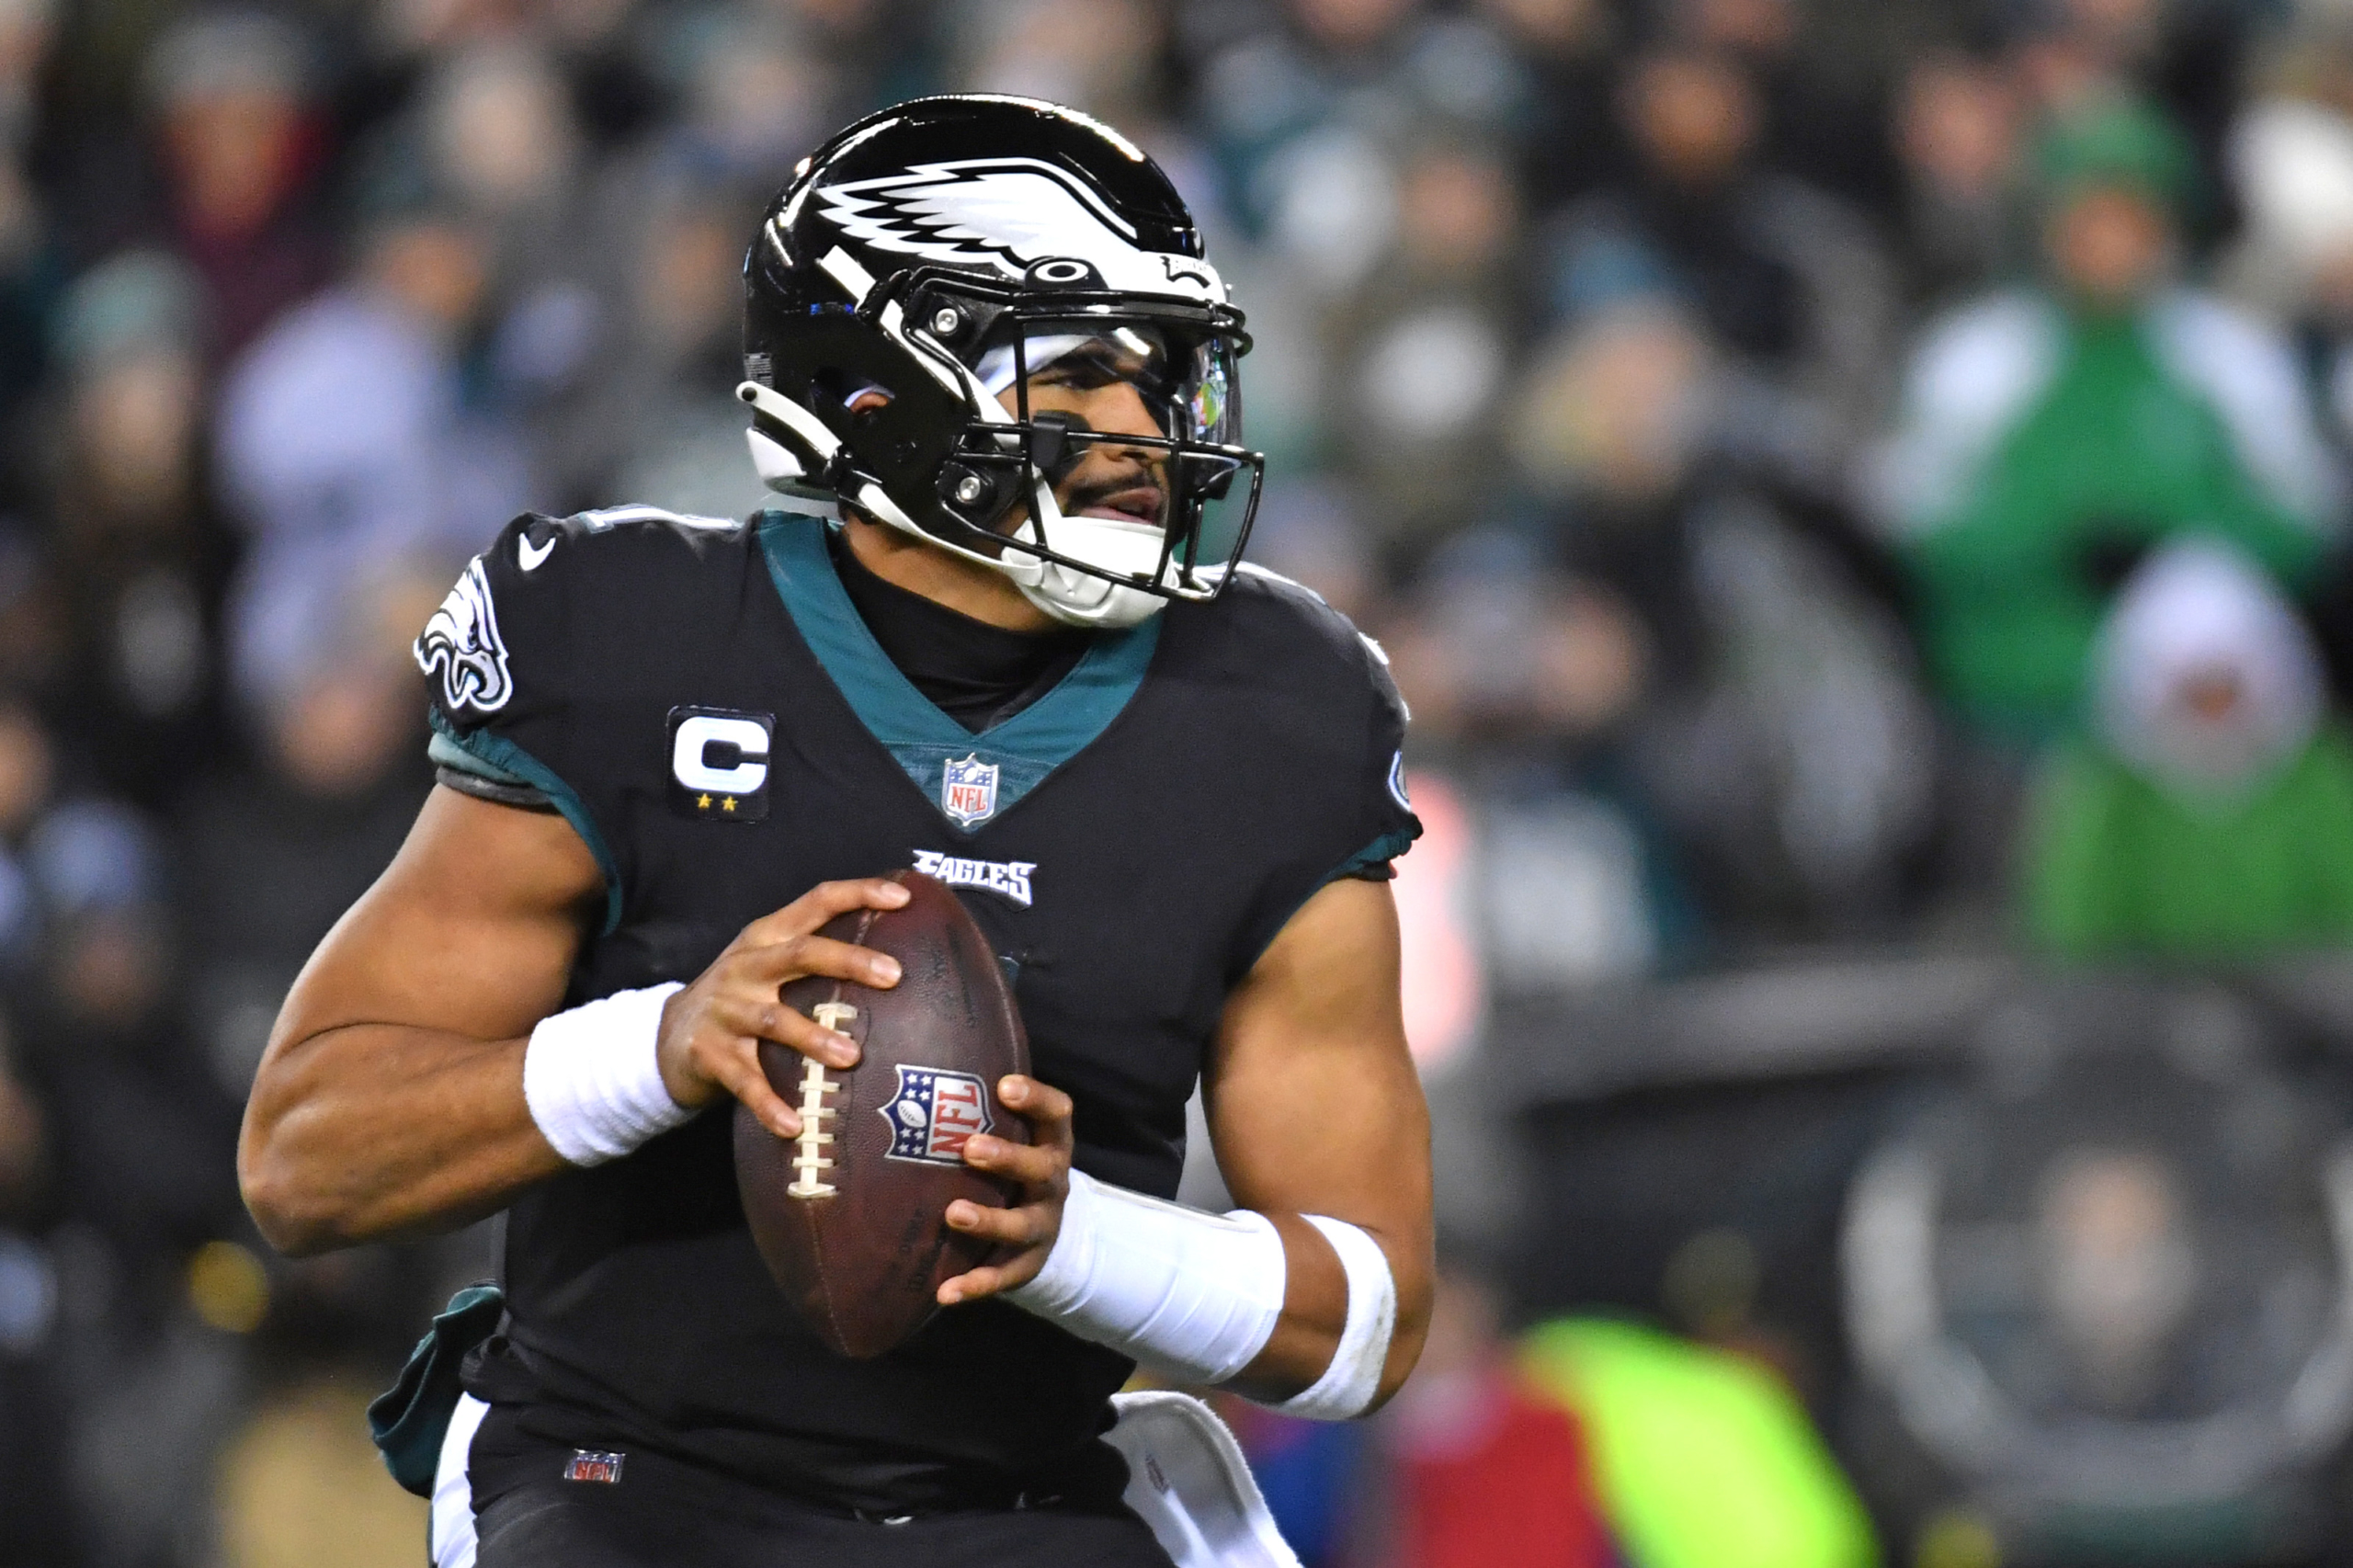 NFL standings 2022-23: Eagles and Chiefs finish with top records